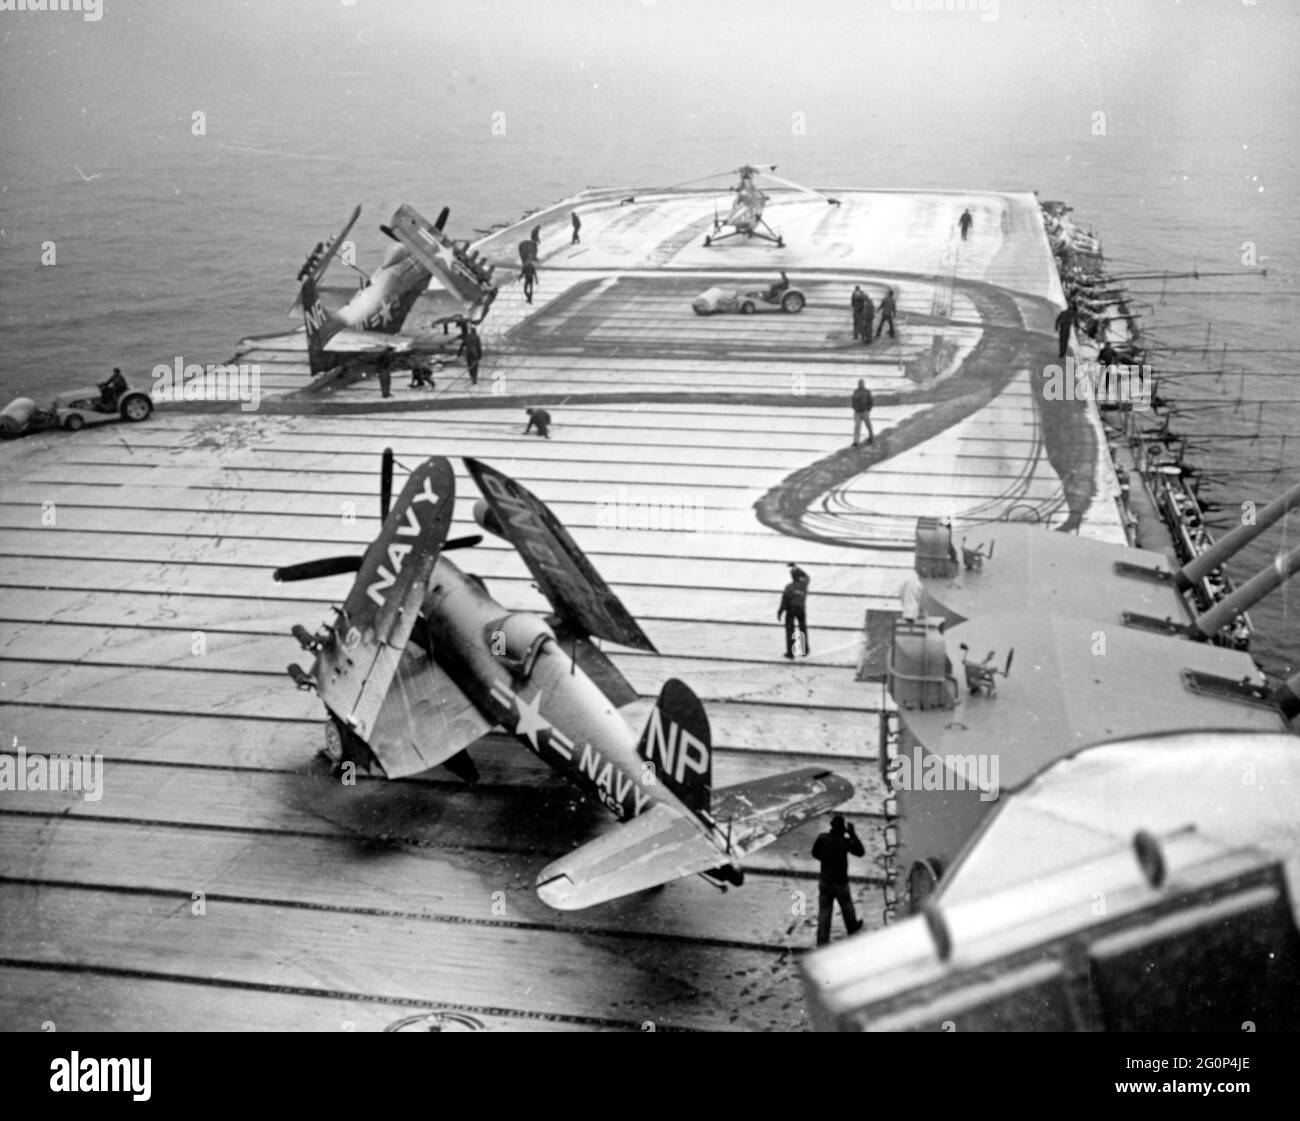 USS Valley Forge (CV-45). Crewmen use flight deck tractors with power brooms to sweep snow from the carrier's flight deck, during operations off Korea, circa early 1951. Photo is dated 8 May 1951, but Valley Forge ended her second Korean War deployment in late March of that year. Plane parked in the foreground is a F4U-4 Corsair fighter. Those on the forward flight deck are an AD Skyraider attack plane and a HO3S helicopter Stock Photo